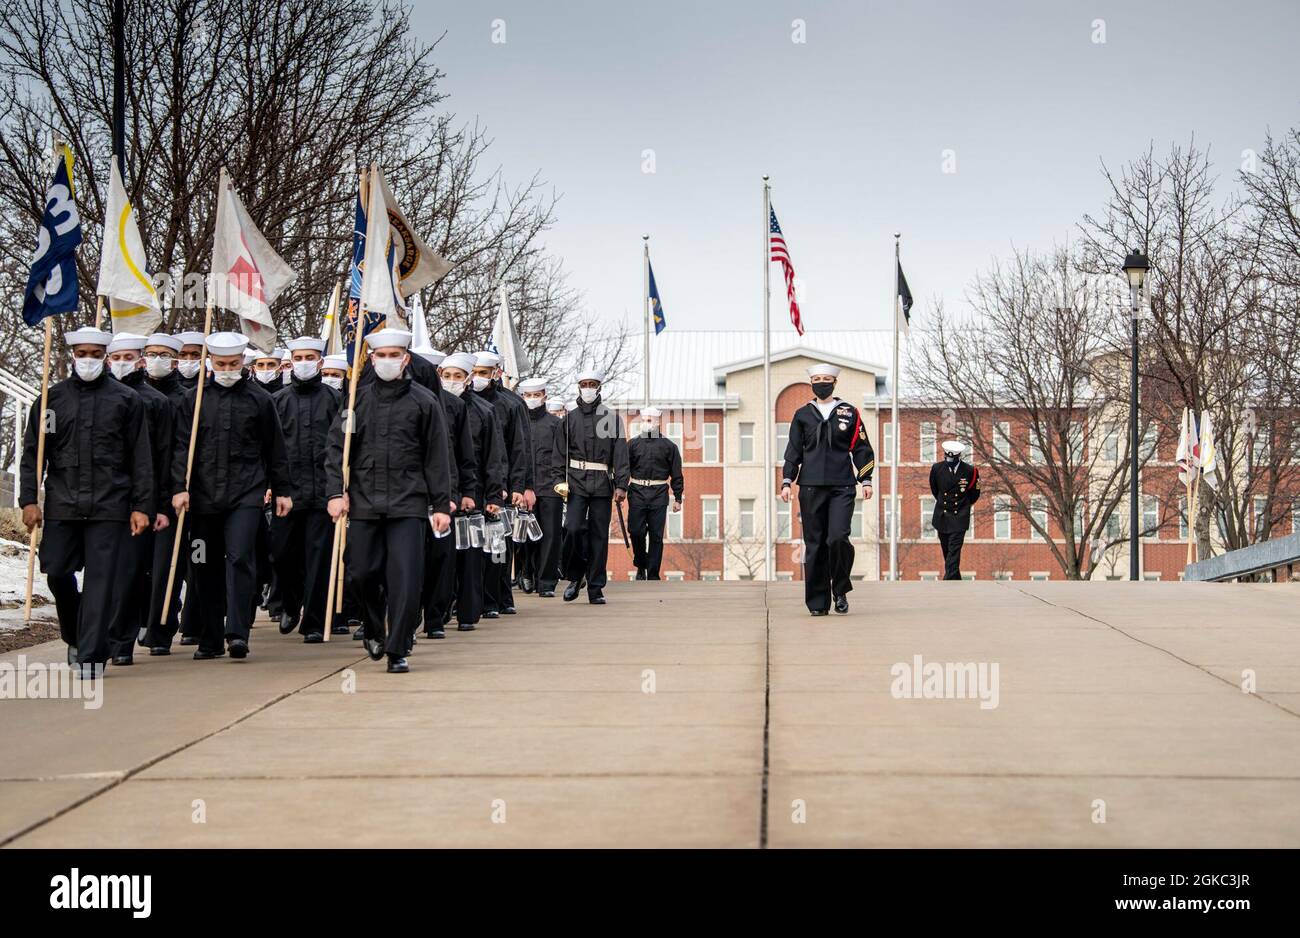 Aviation Ordnanceman 1st Class Sarah Minnick, a recruit division commander, marches alongside her recruit division at Recruit Training Command. More than 40,000 recruits train annually at the Navy’s only boot camp. Stock Photo